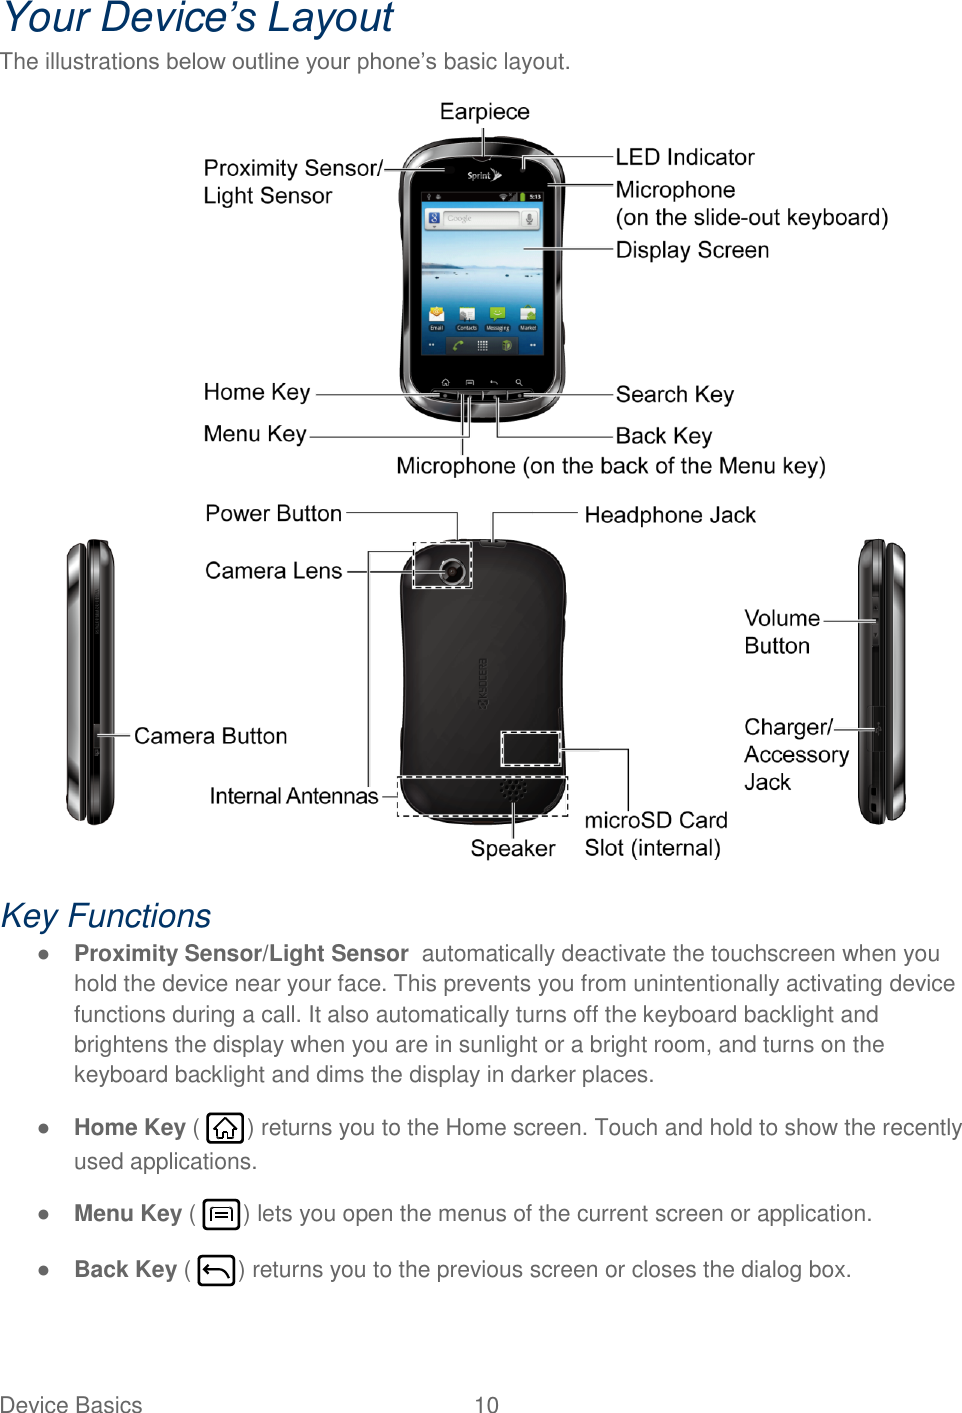 Device Basics  10   Your Device’s Layout The illustrations below outline your phone’s basic layout.  Key Functions ● Proximity Sensor/Light Sensor  automatically deactivate the touchscreen when you hold the device near your face. This prevents you from unintentionally activating device functions during a call. It also automatically turns off the keyboard backlight and brightens the display when you are in sunlight or a bright room, and turns on the keyboard backlight and dims the display in darker places. ● Home Key (  ) returns you to the Home screen. Touch and hold to show the recently used applications. ● Menu Key (  ) lets you open the menus of the current screen or application. ● Back Key (  ) returns you to the previous screen or closes the dialog box. 